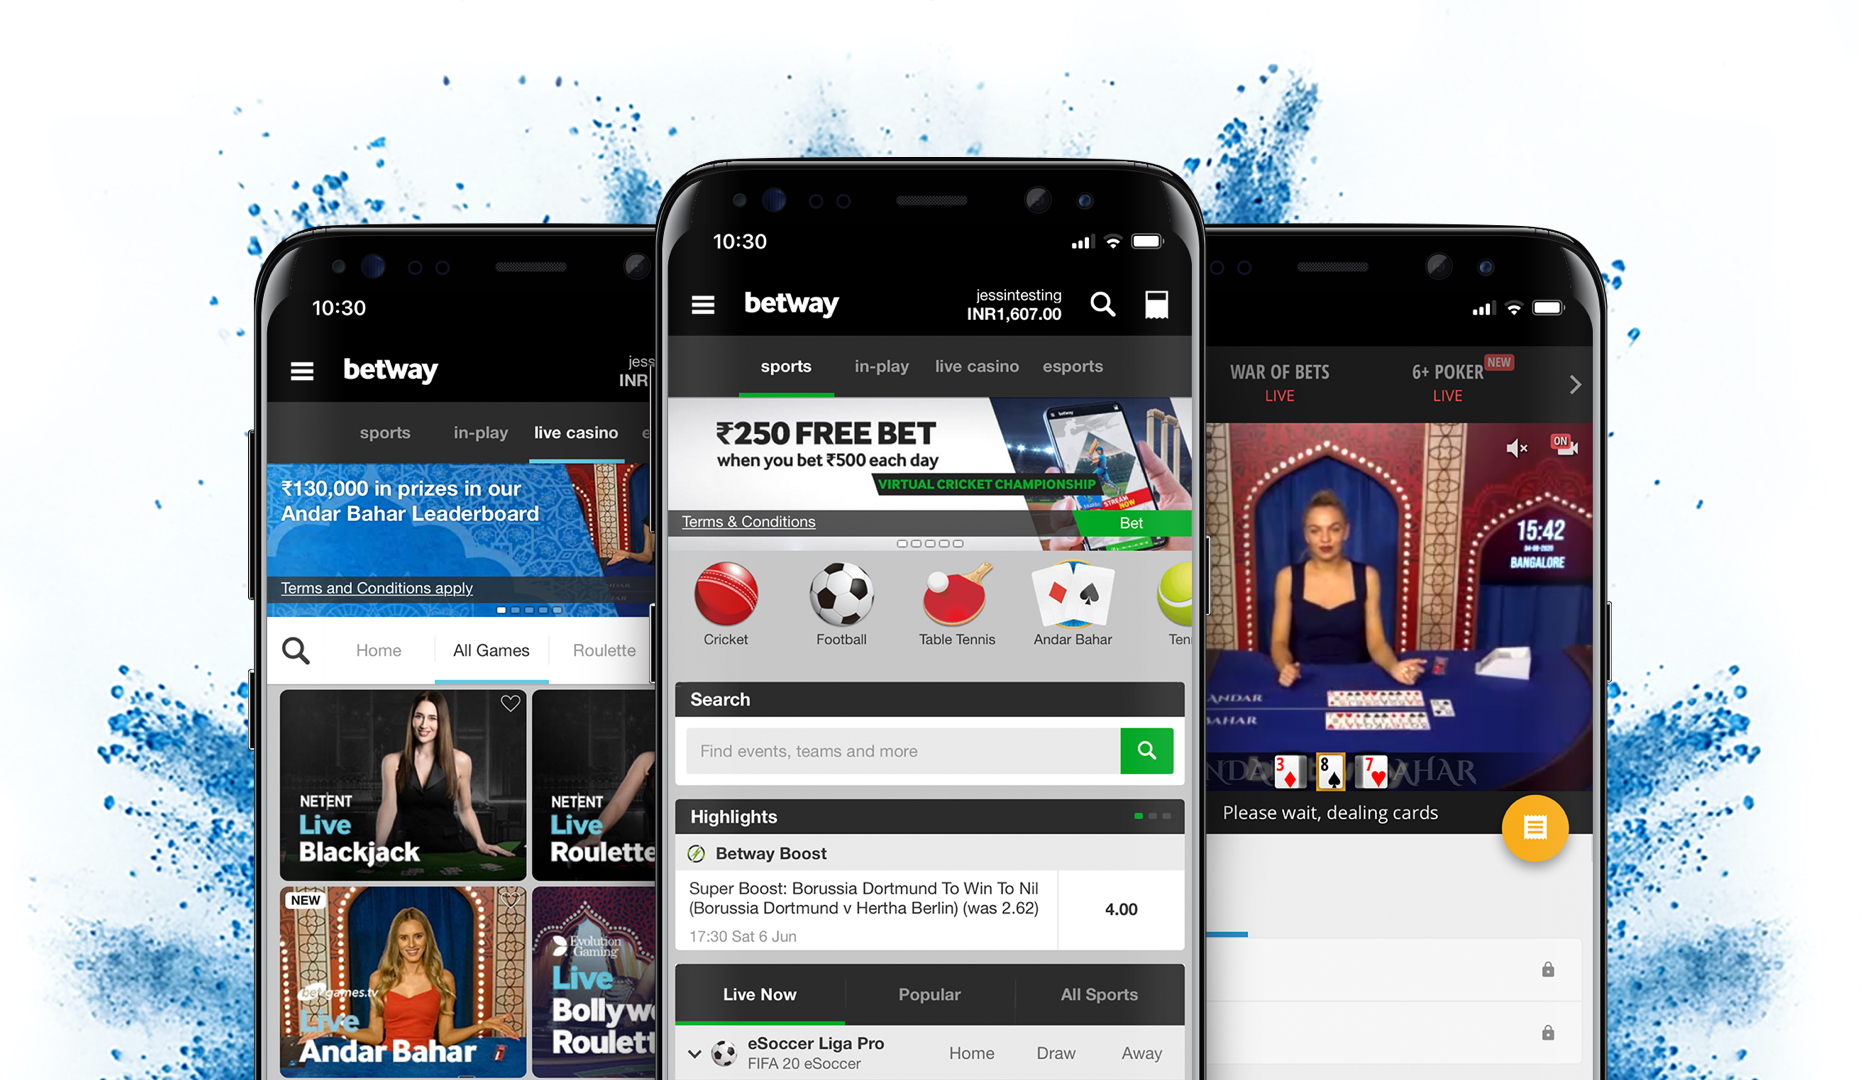 With the Betway App you can access all of your favourite sports and games, wherever you are, whenever you want.